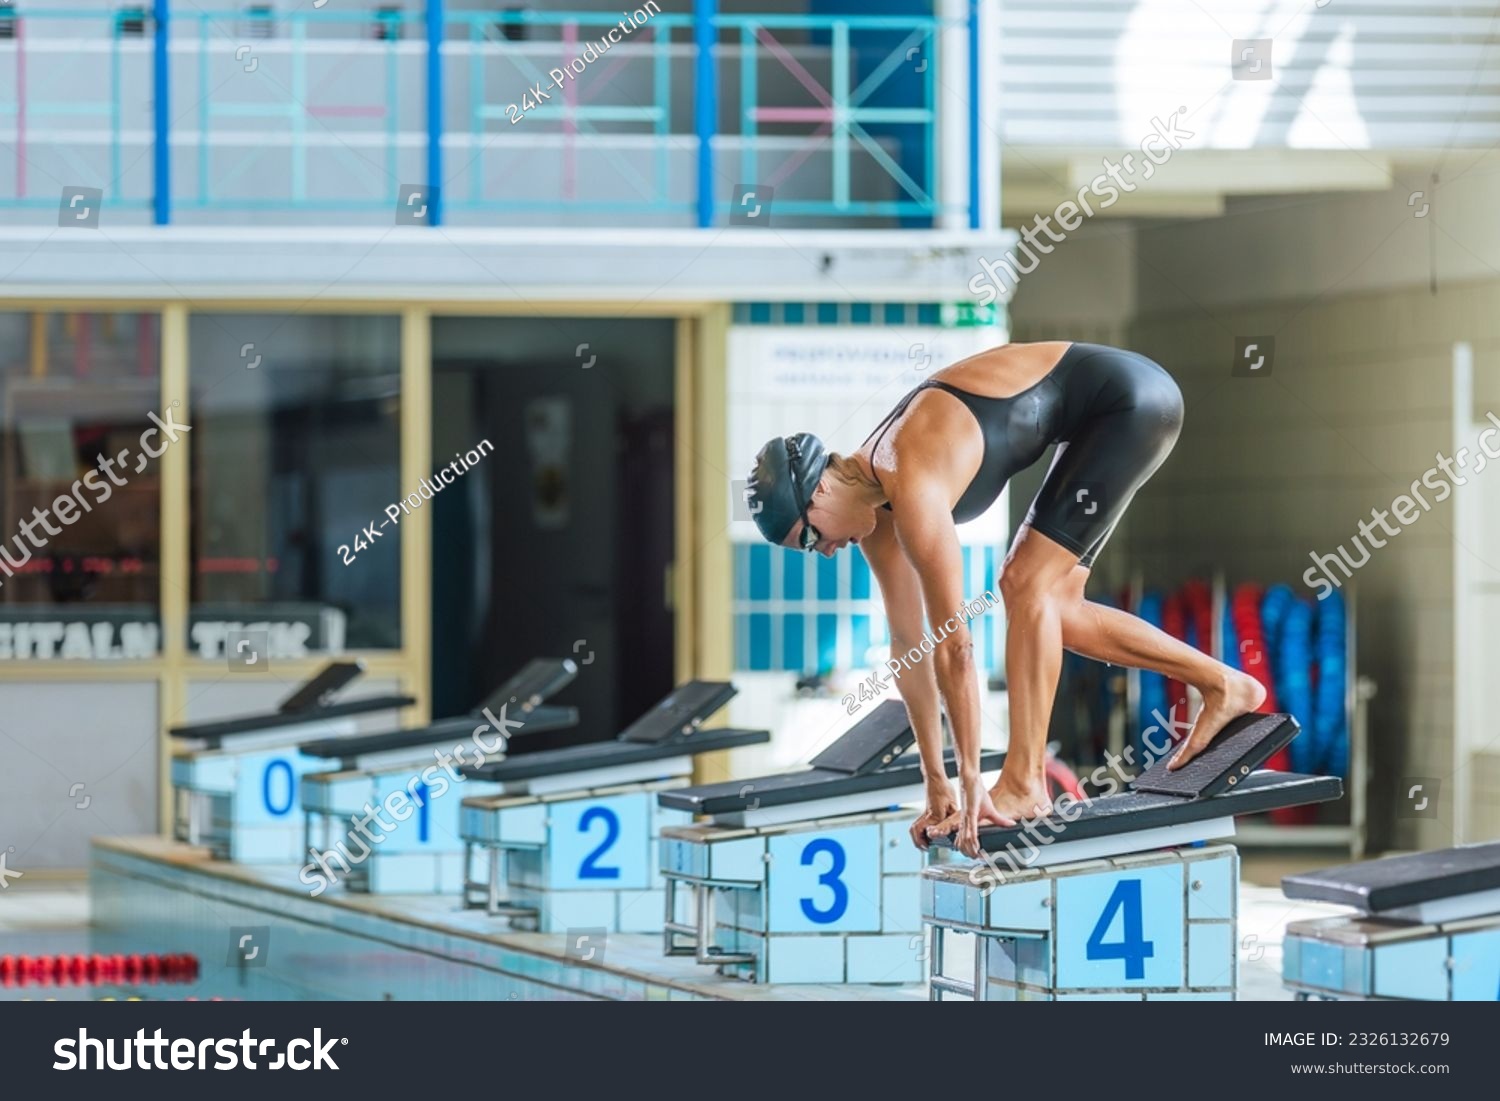 Elite female swimmer taking a position on the start block, using slingshot technique with a back footplate. Professional sport concept. #2326132679